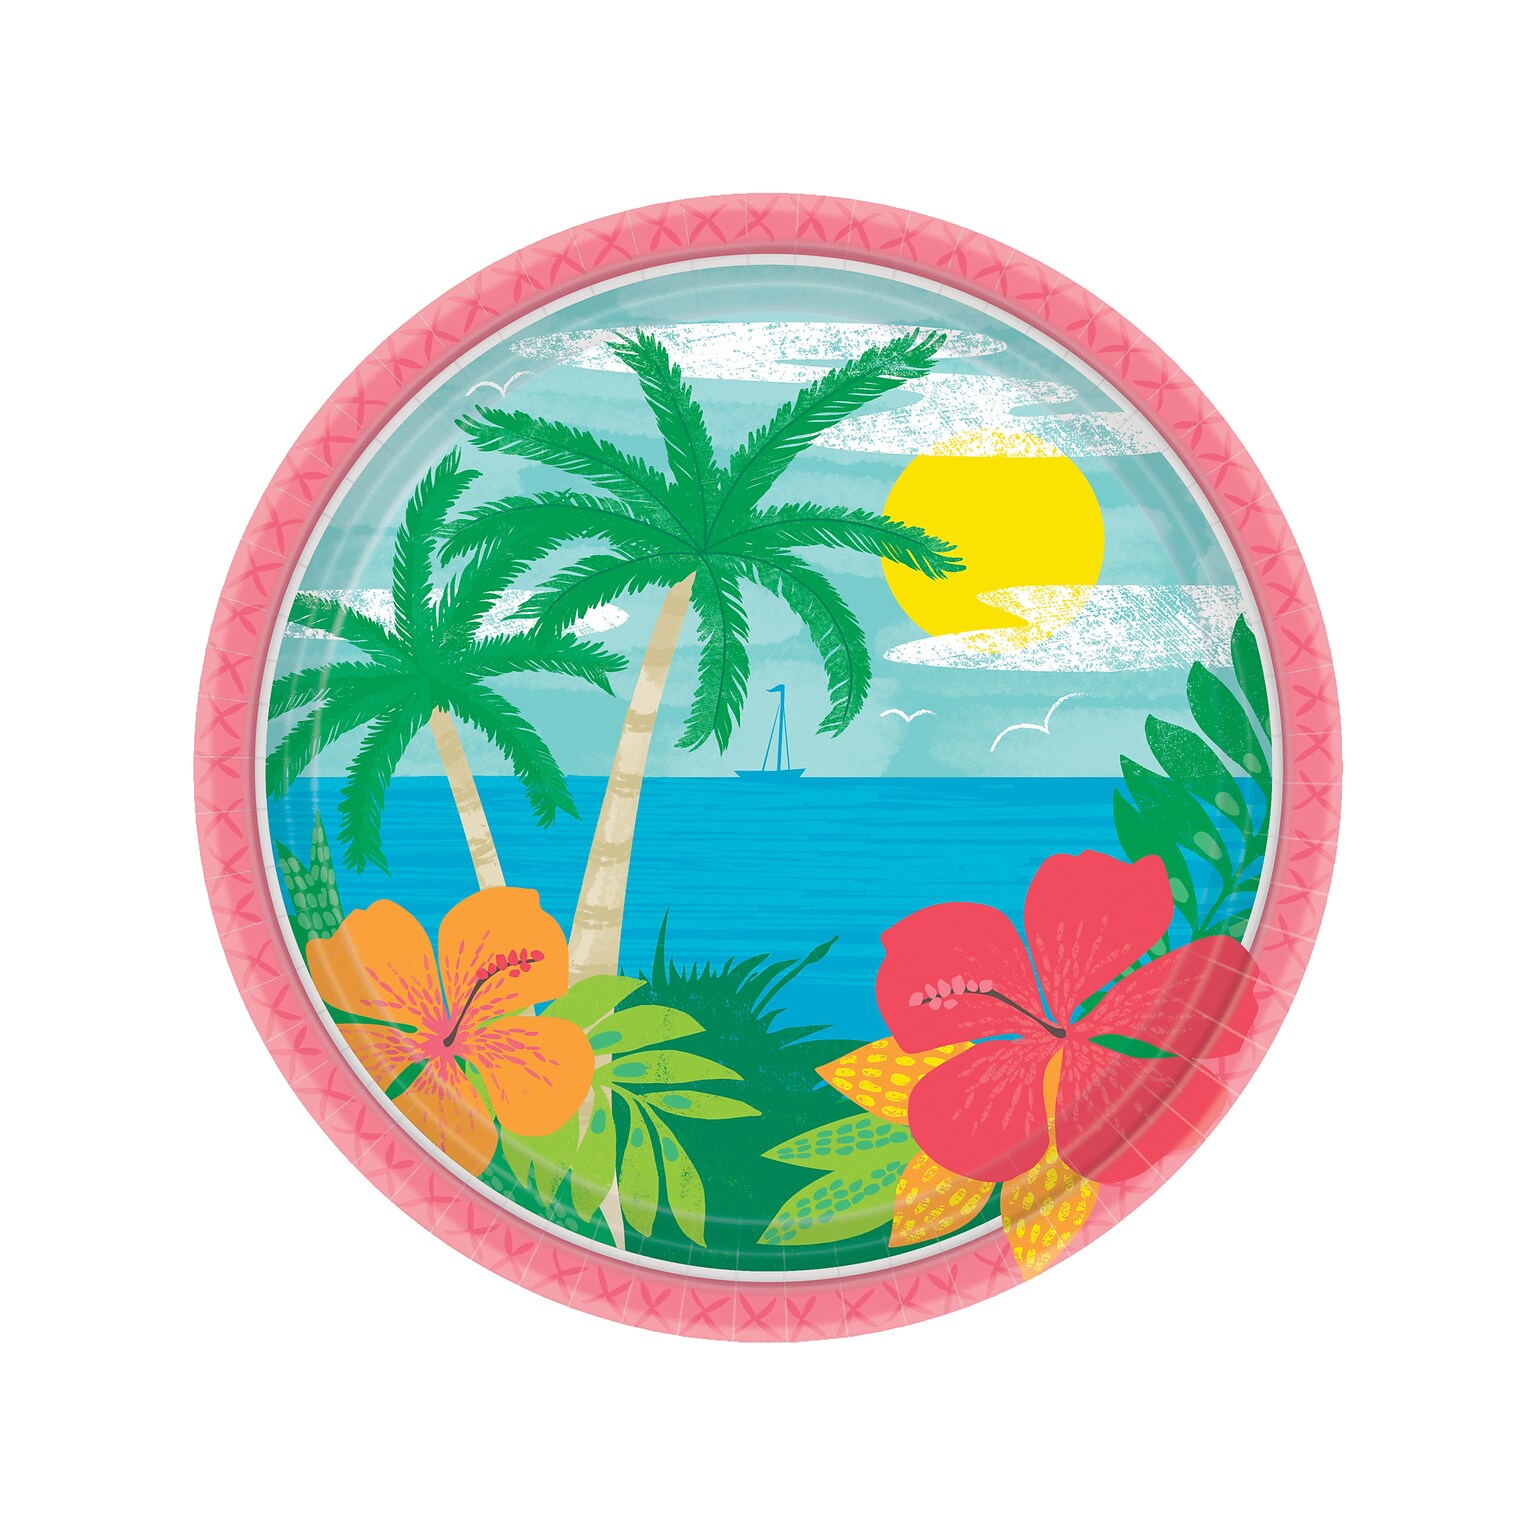 Amscan Summer Vibes Party Plate, Multicolor (741963)